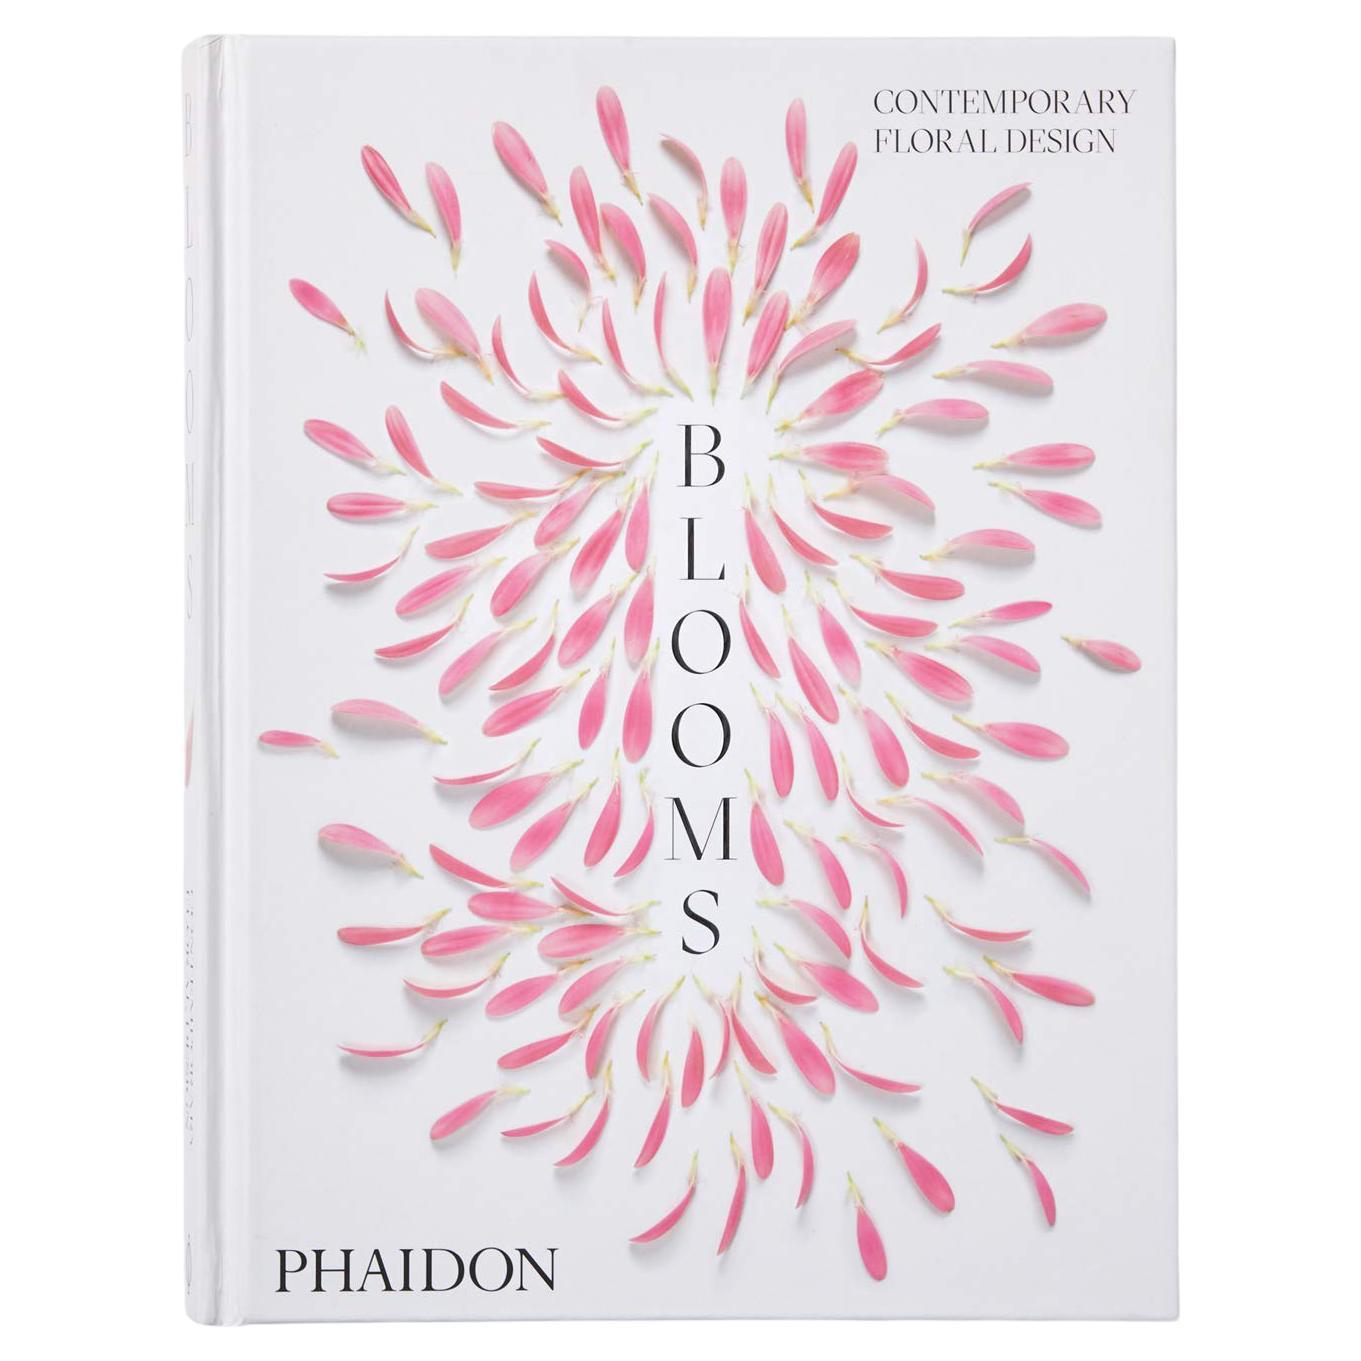 In Stock in Los Angeles, Blooms Contemporary Floral Design